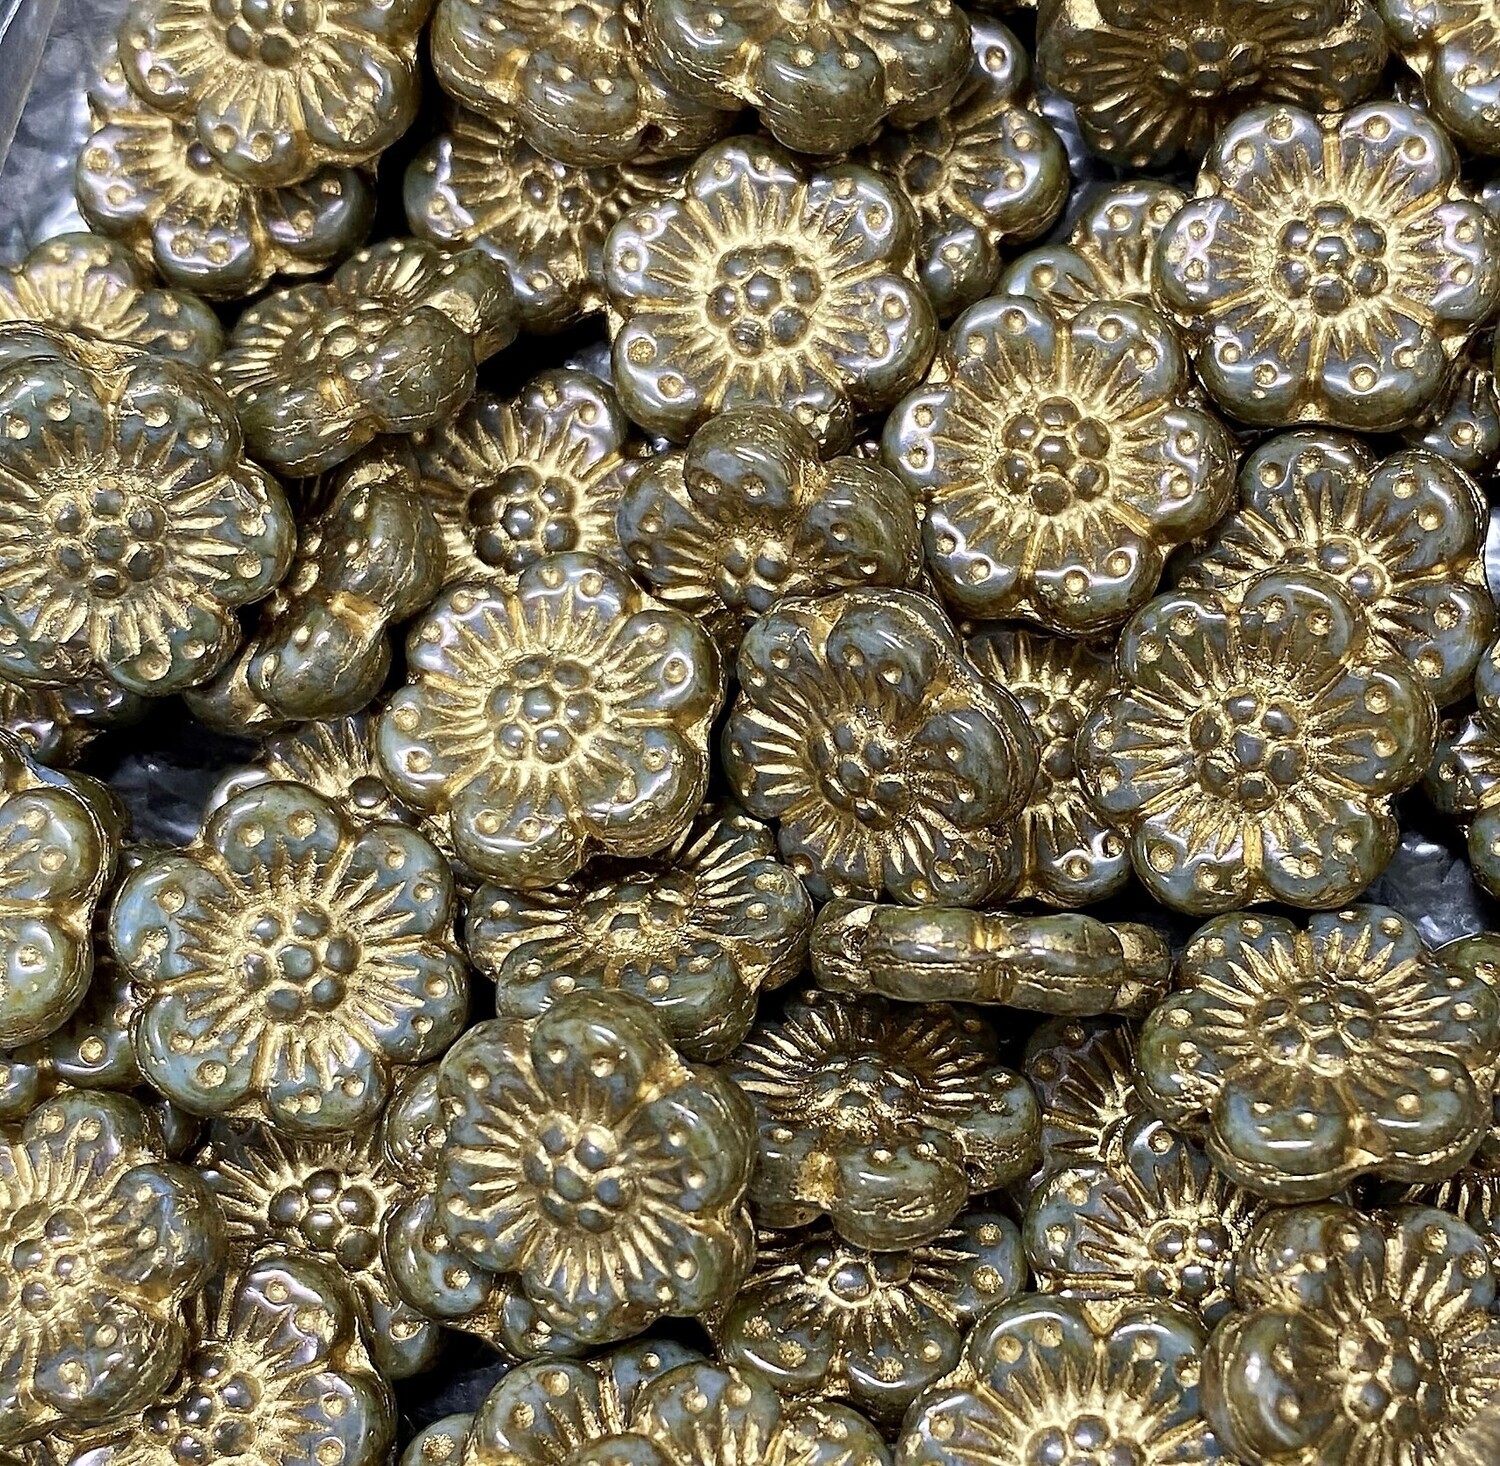 14mm Sage Green Czech Glass Flowers with Gold